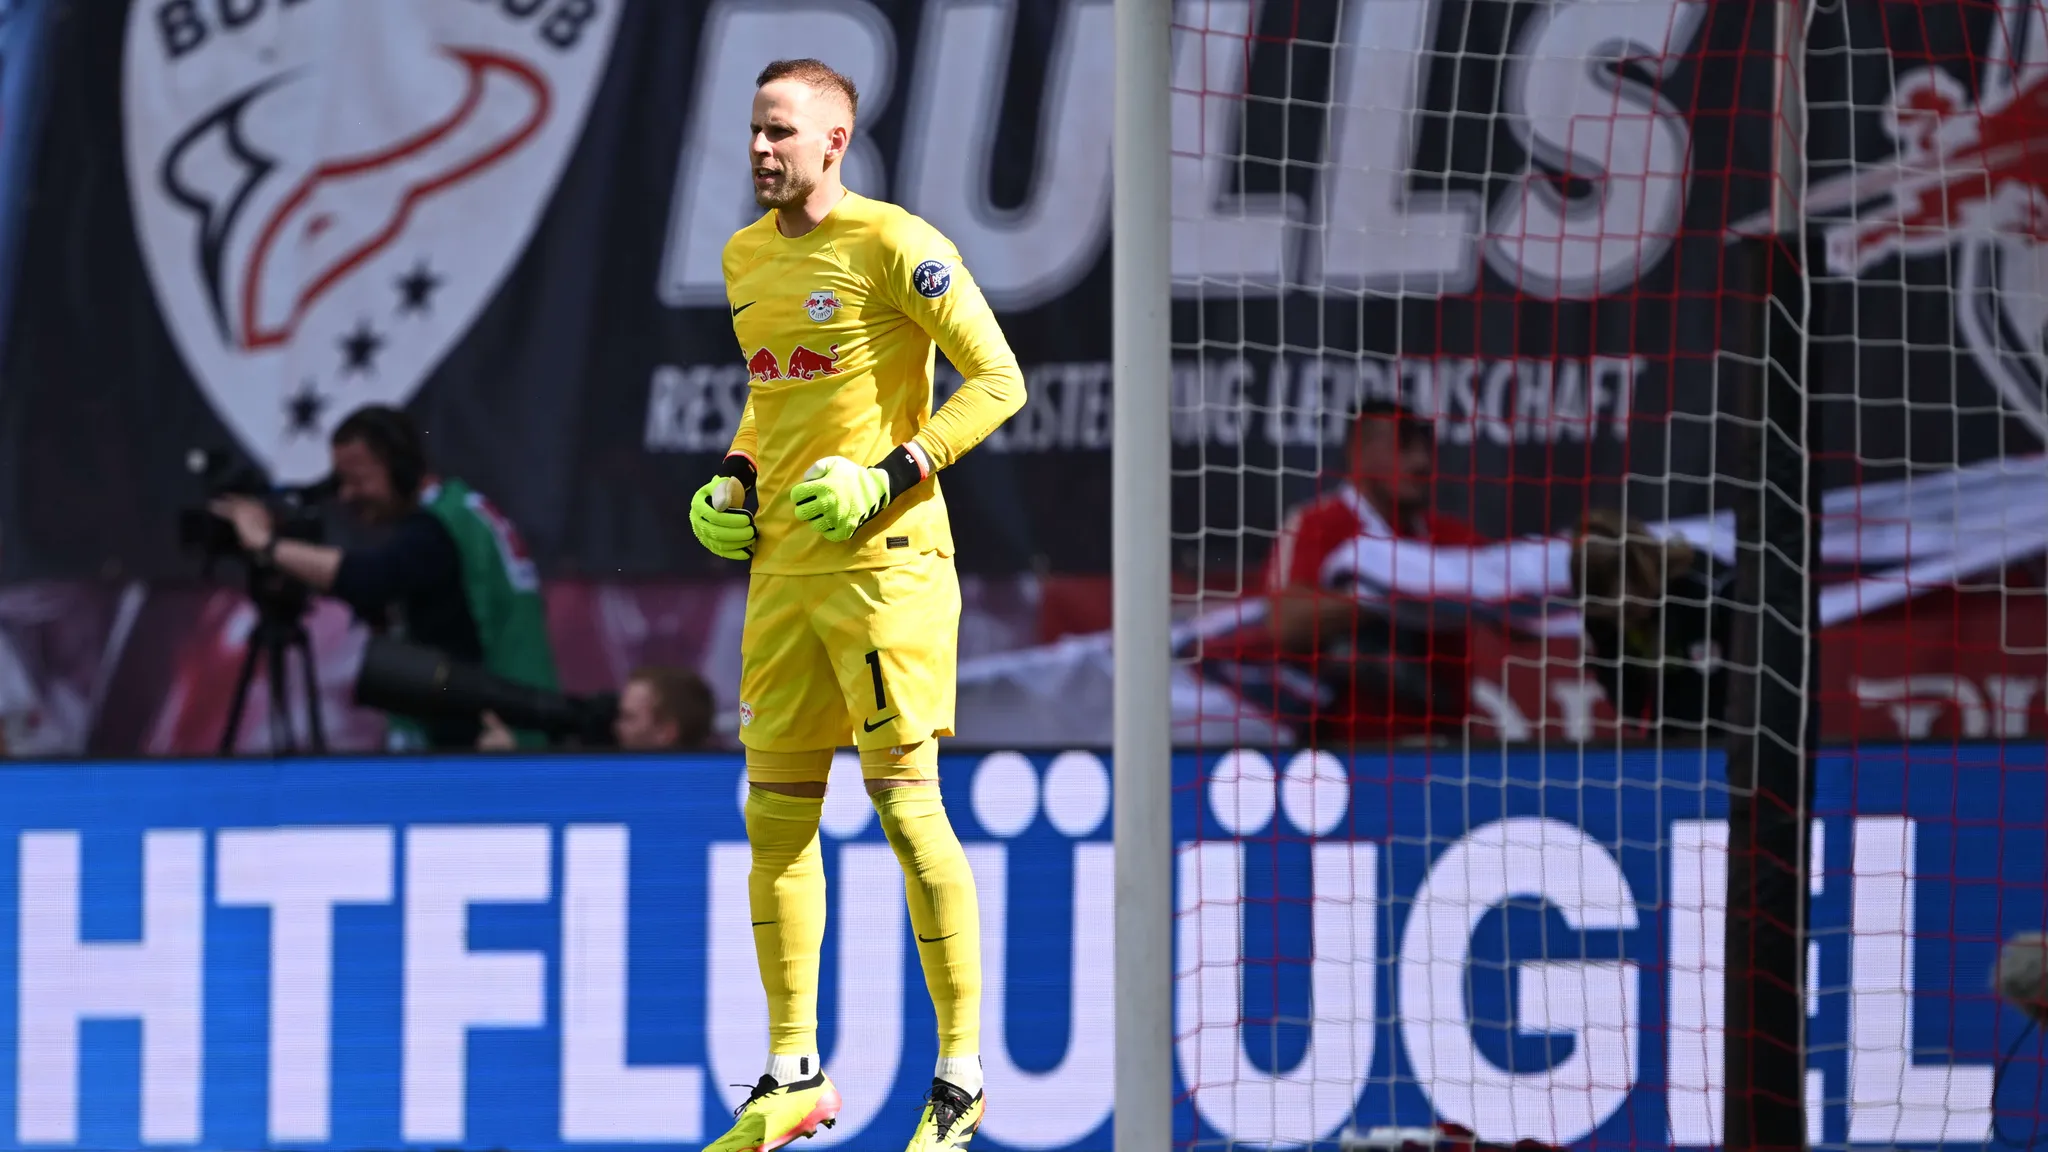 Peter Gulacsi is an insurance policy